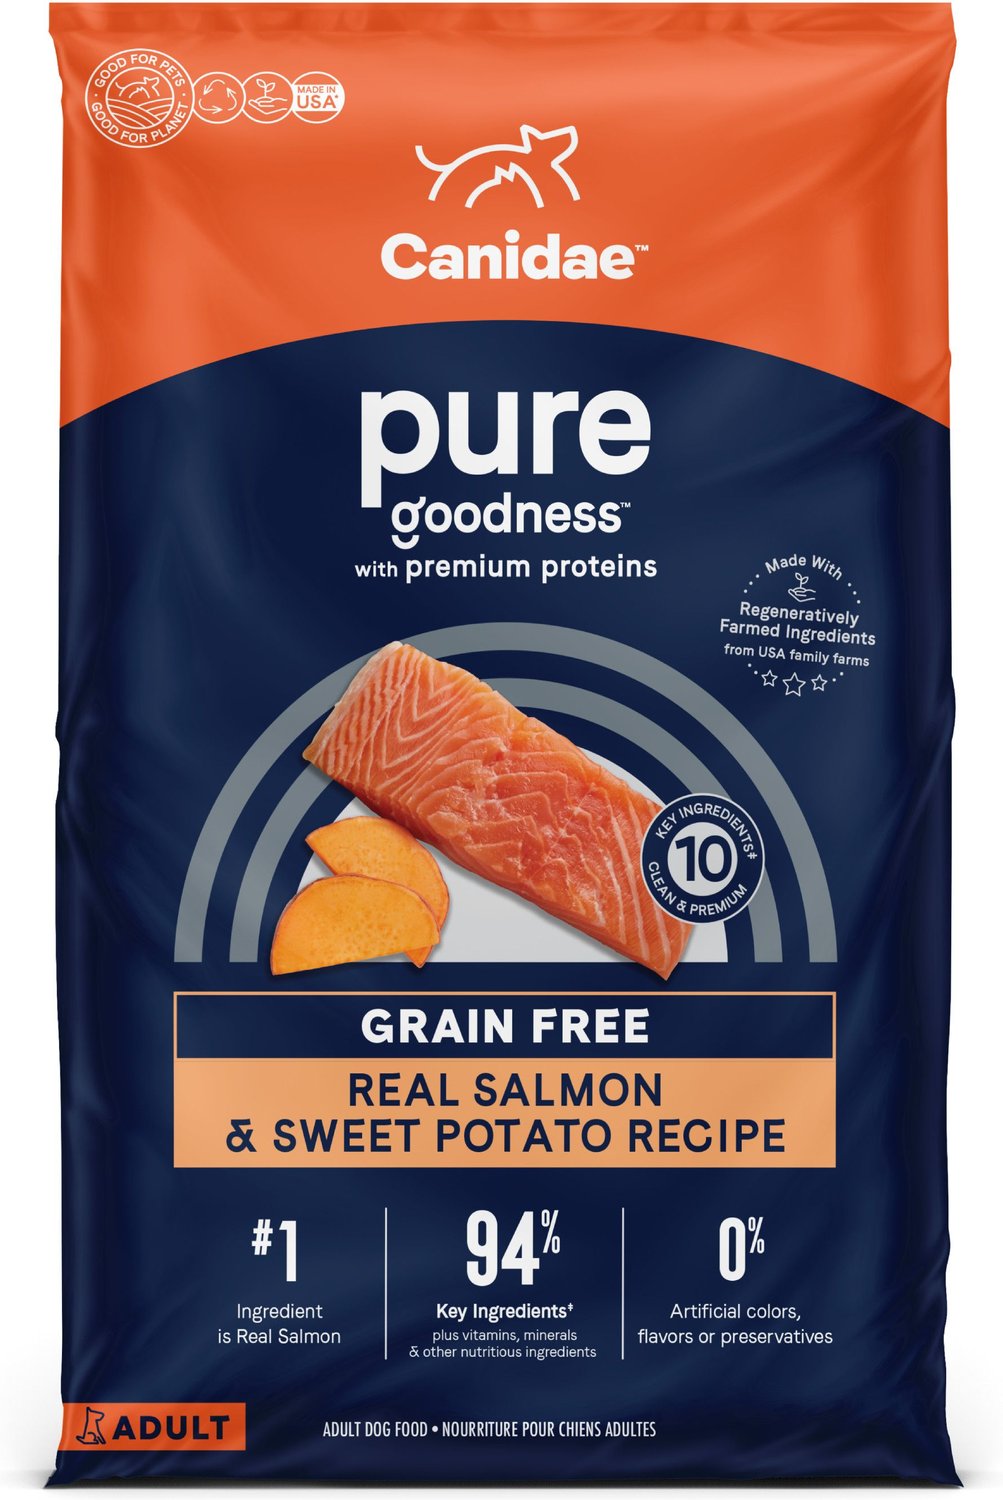 CANIDAE Grain-Free PURE Puppy 